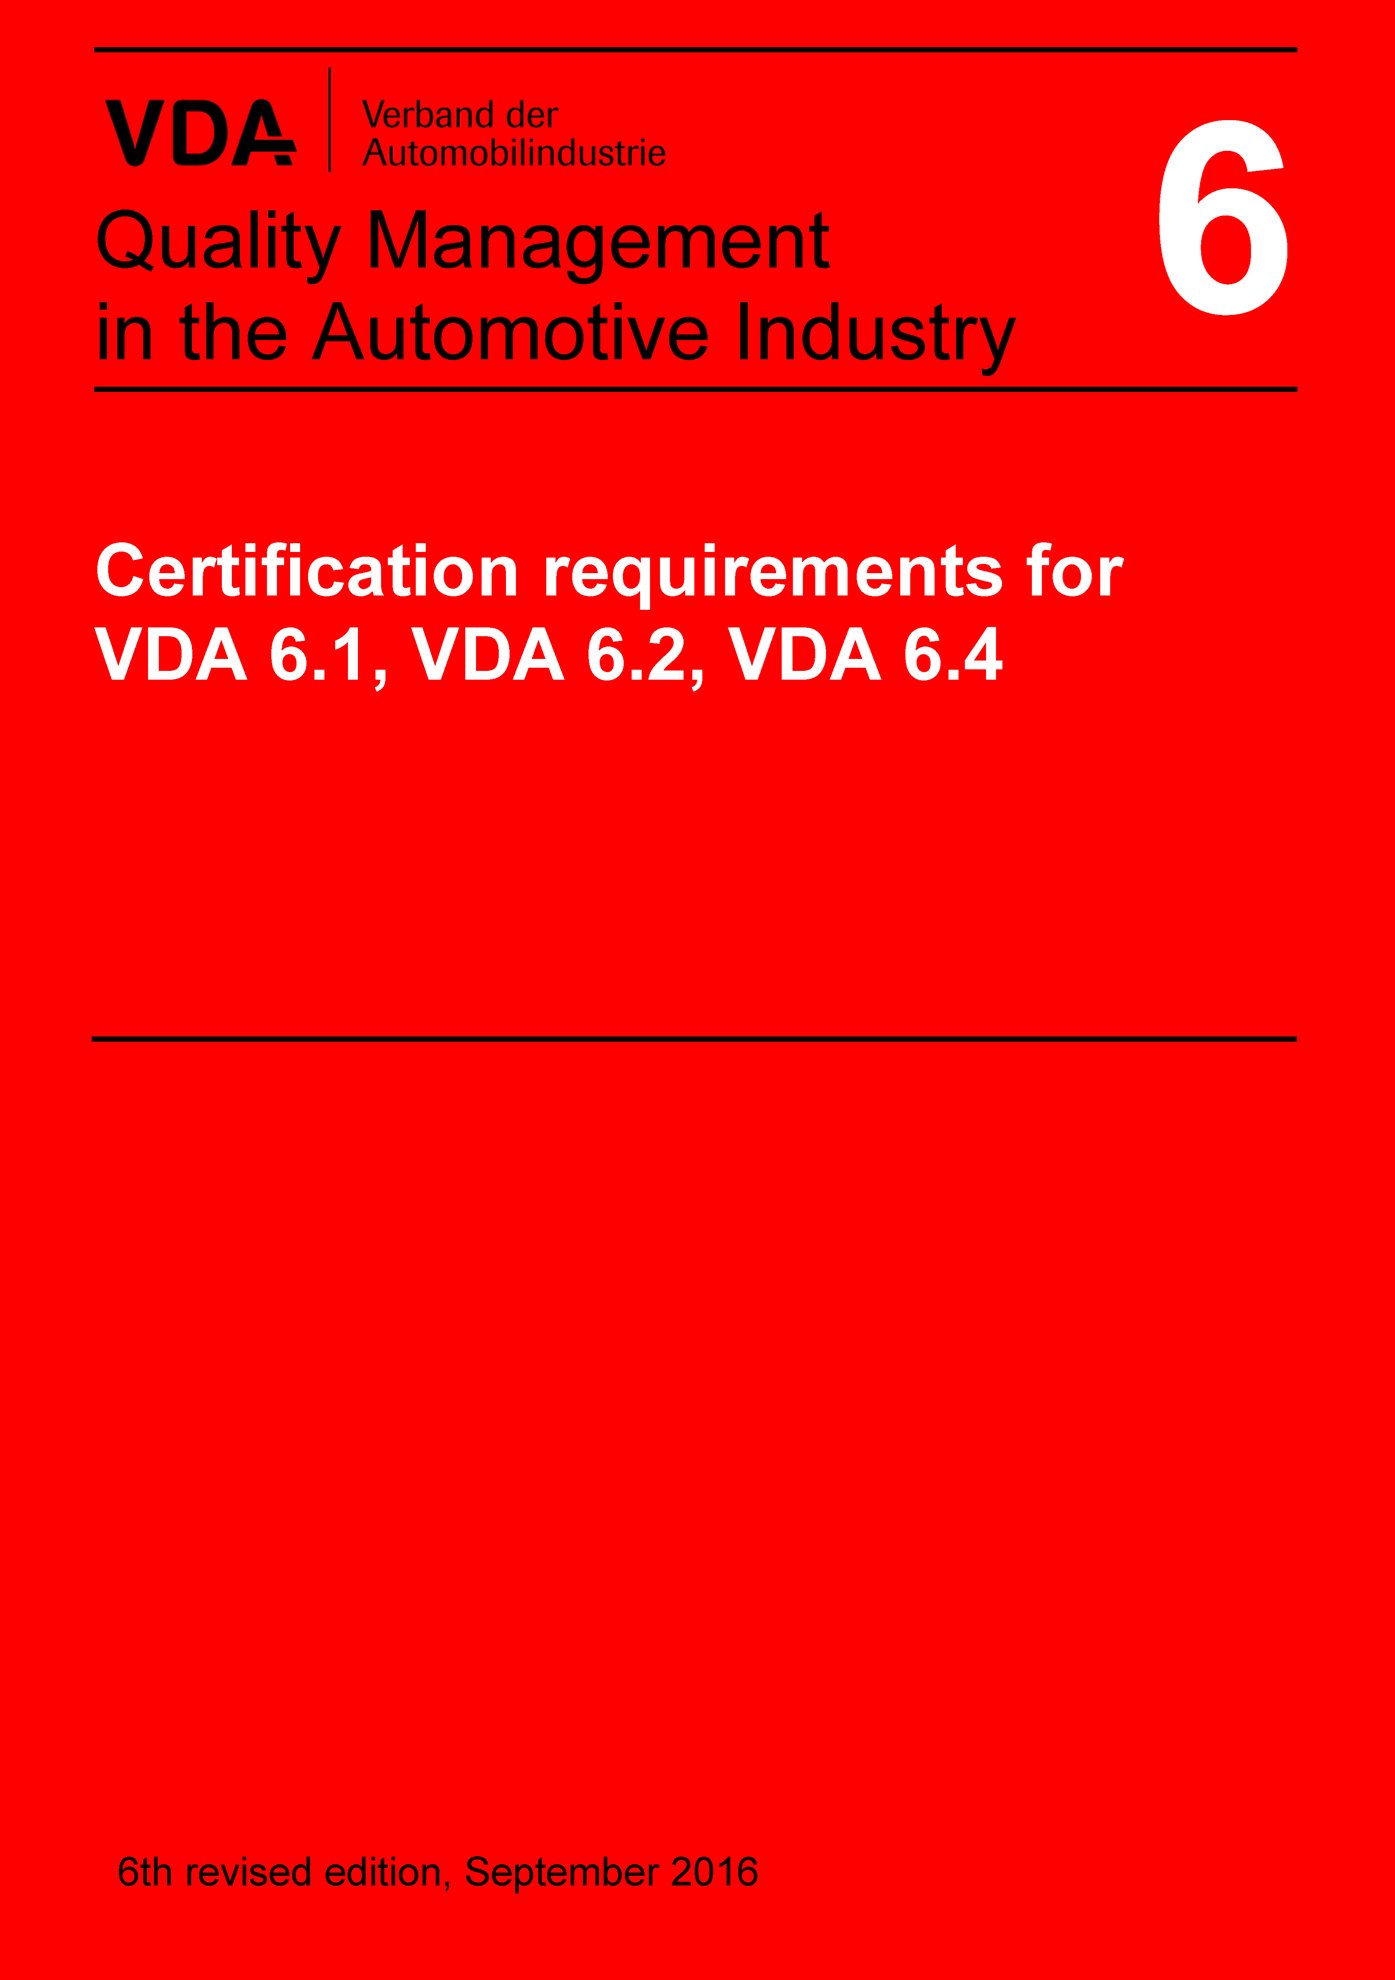 Náhľad  VDA Volume 6 Certification Requirements for VDA 6.1, VDA 6.2 and VDA 6.4
 6th revised edition, September 2016
 (English edition published 2017/09) 1.9.2016